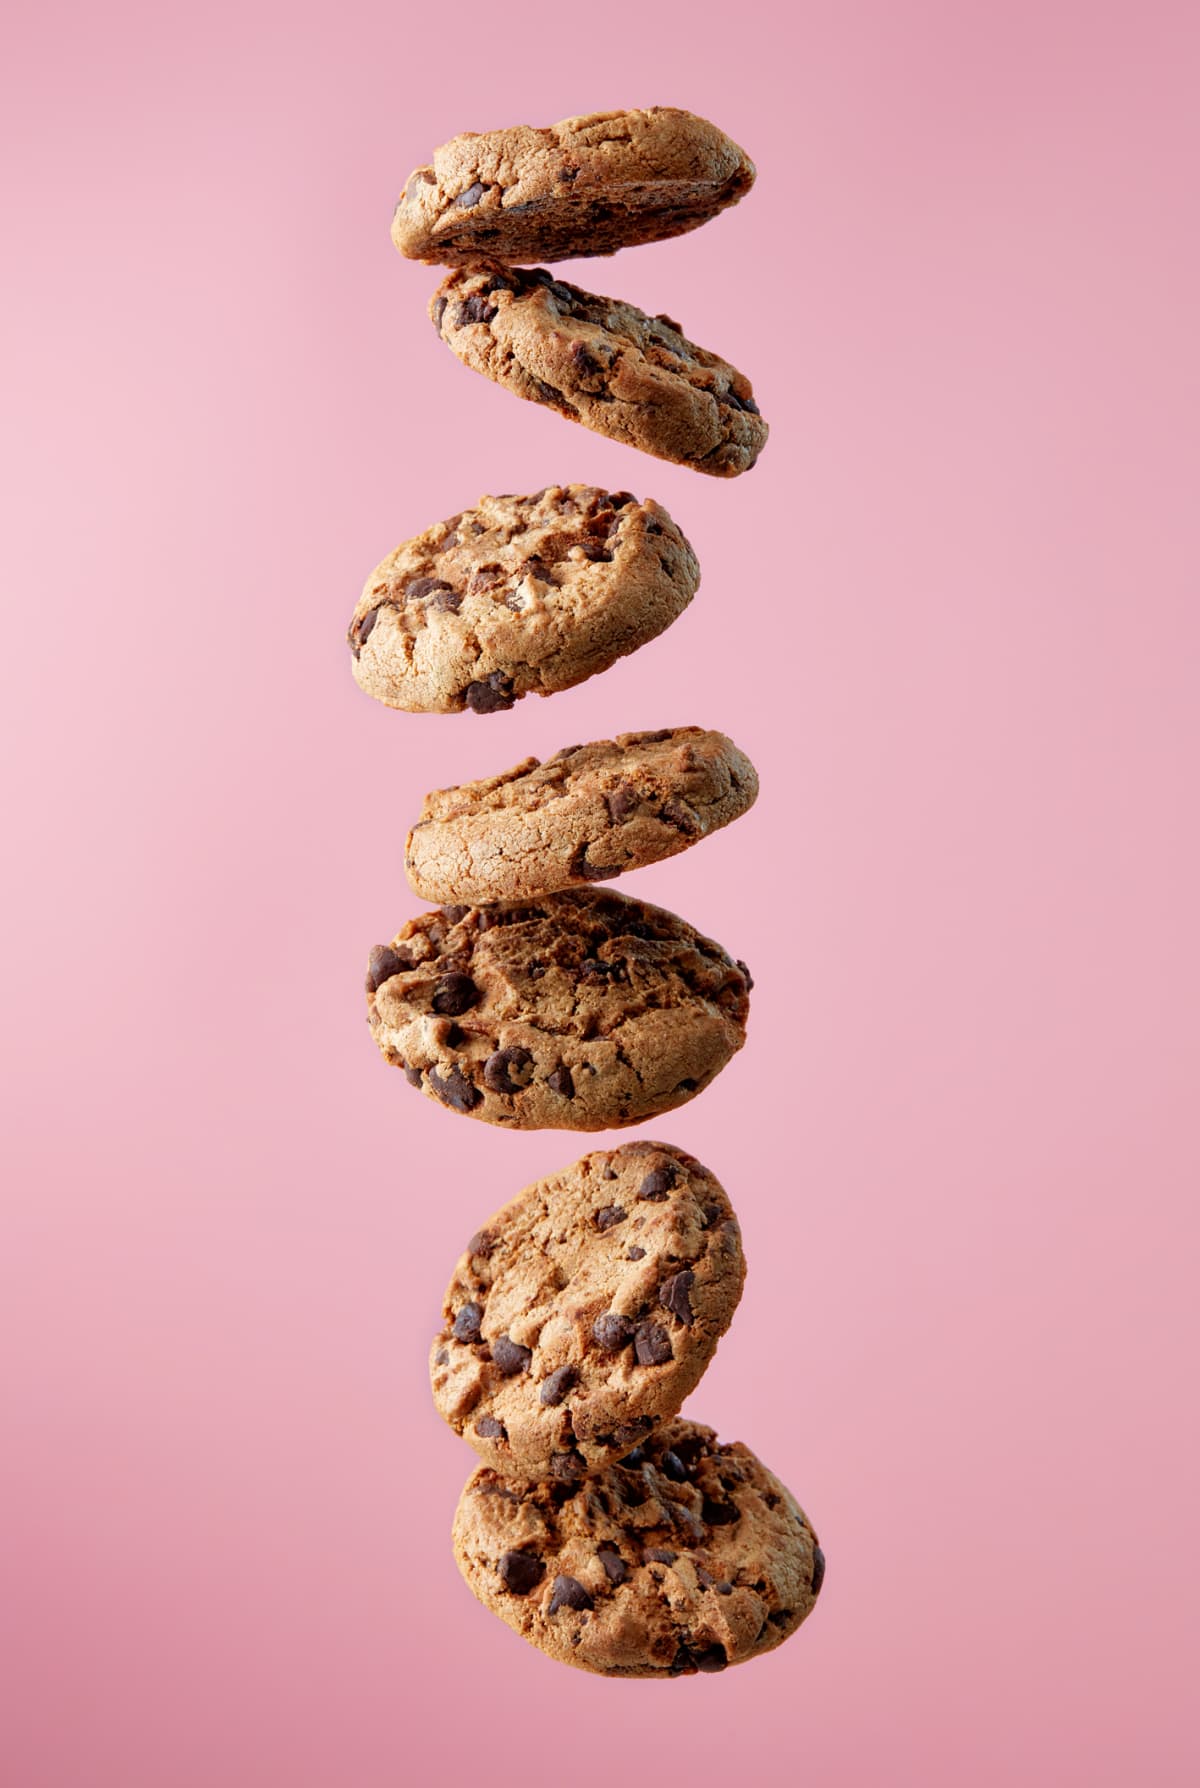 Chocolate chip cookies falling in the air on a pink background